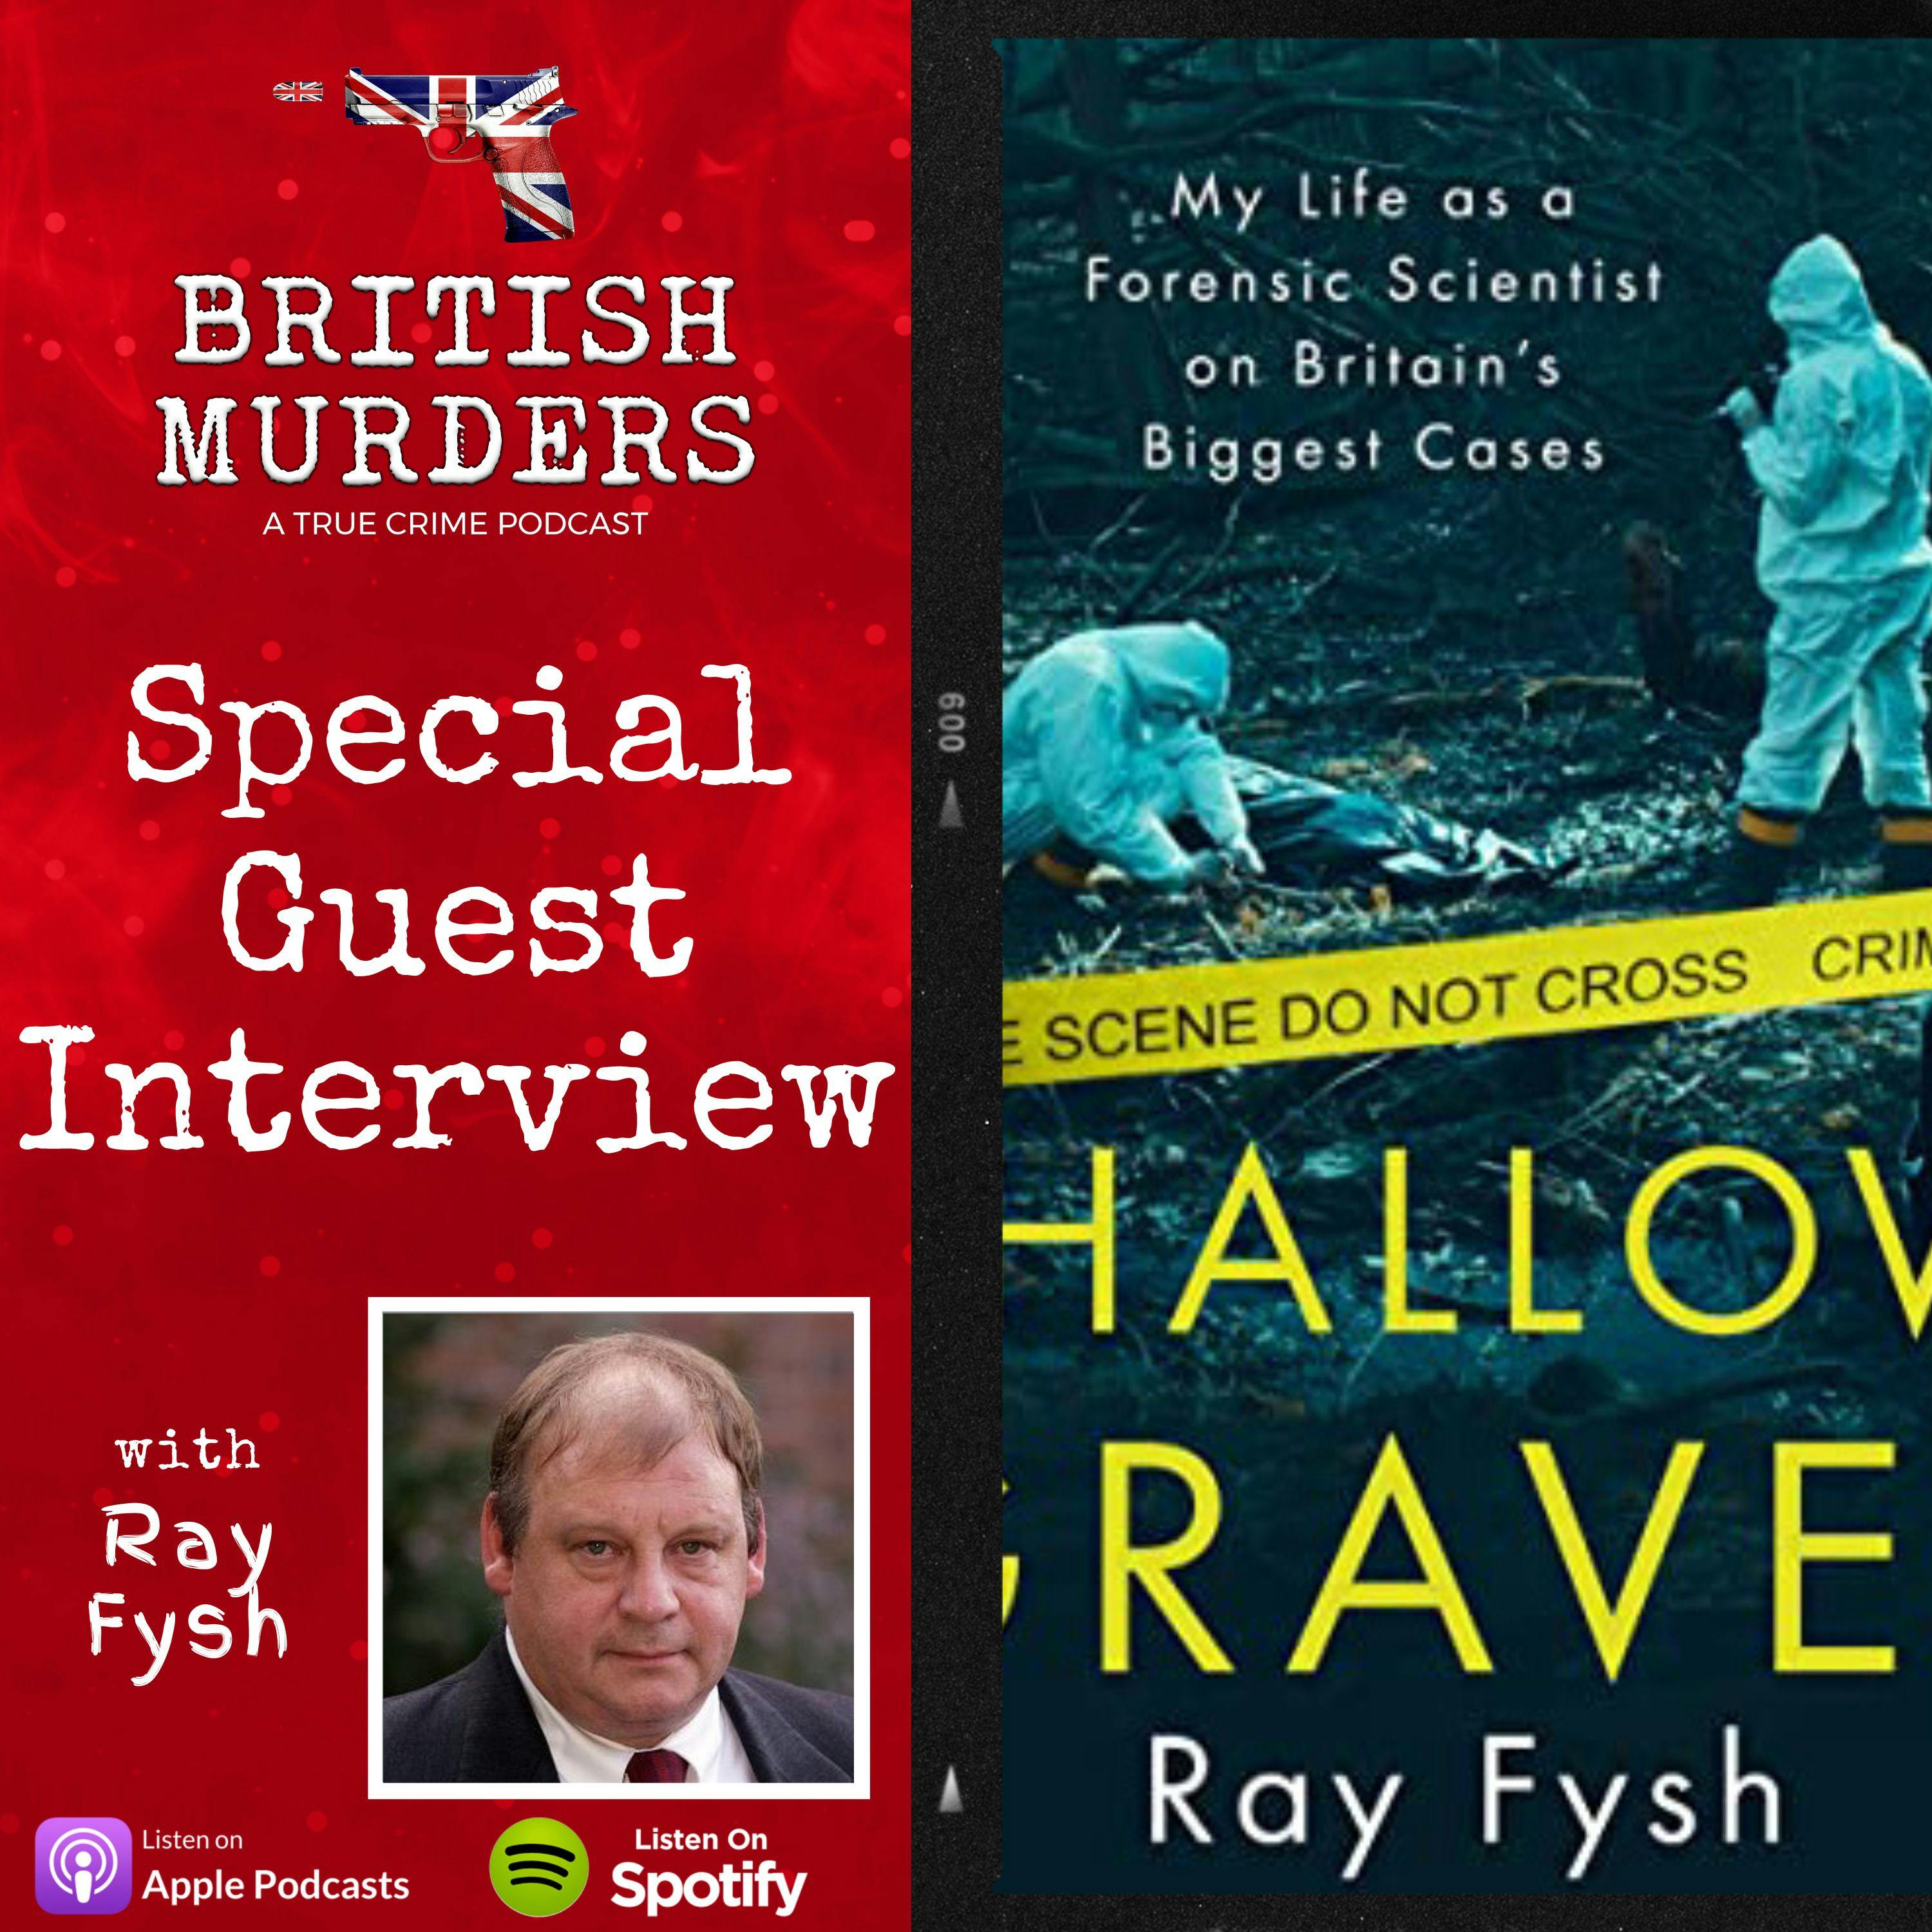 Interview #21 | Ray Fysh (Former Forensic Scientist)